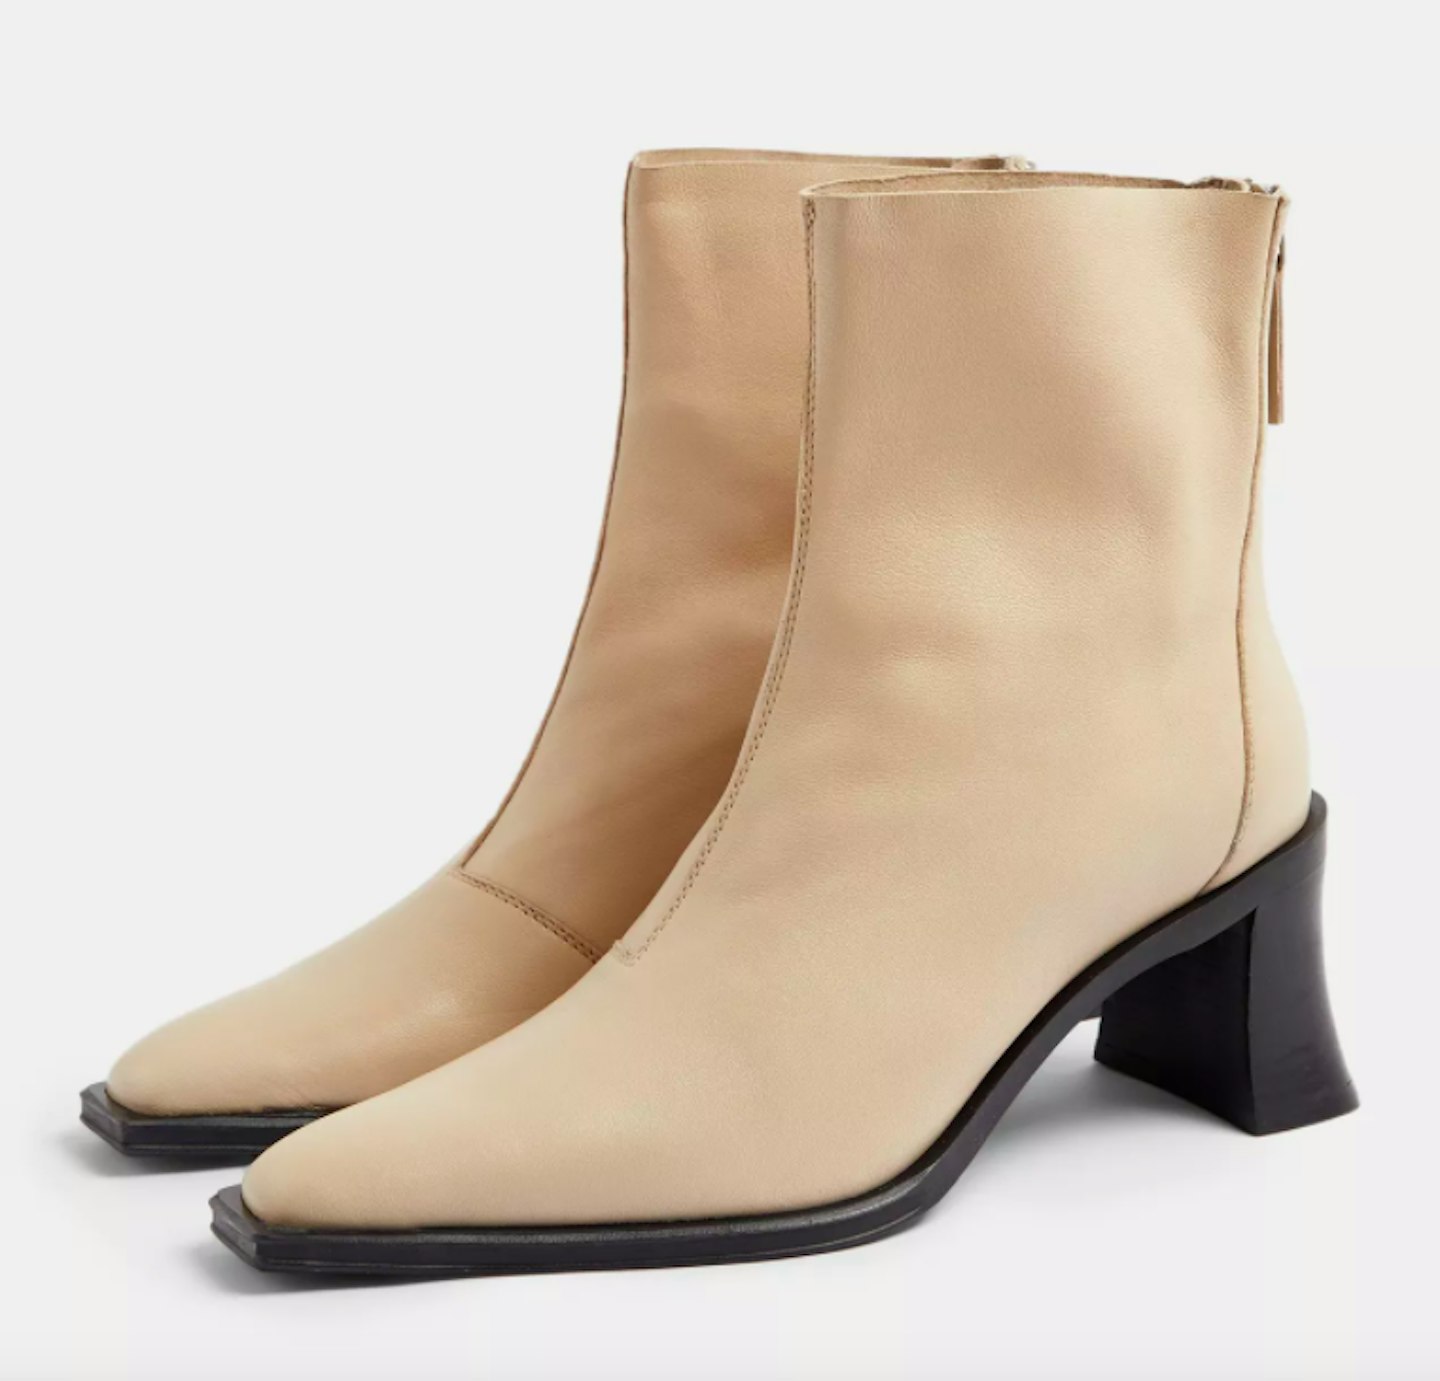 Topshop, Money Leather Heeled Boots, WAS £65.99, NOW £49.99